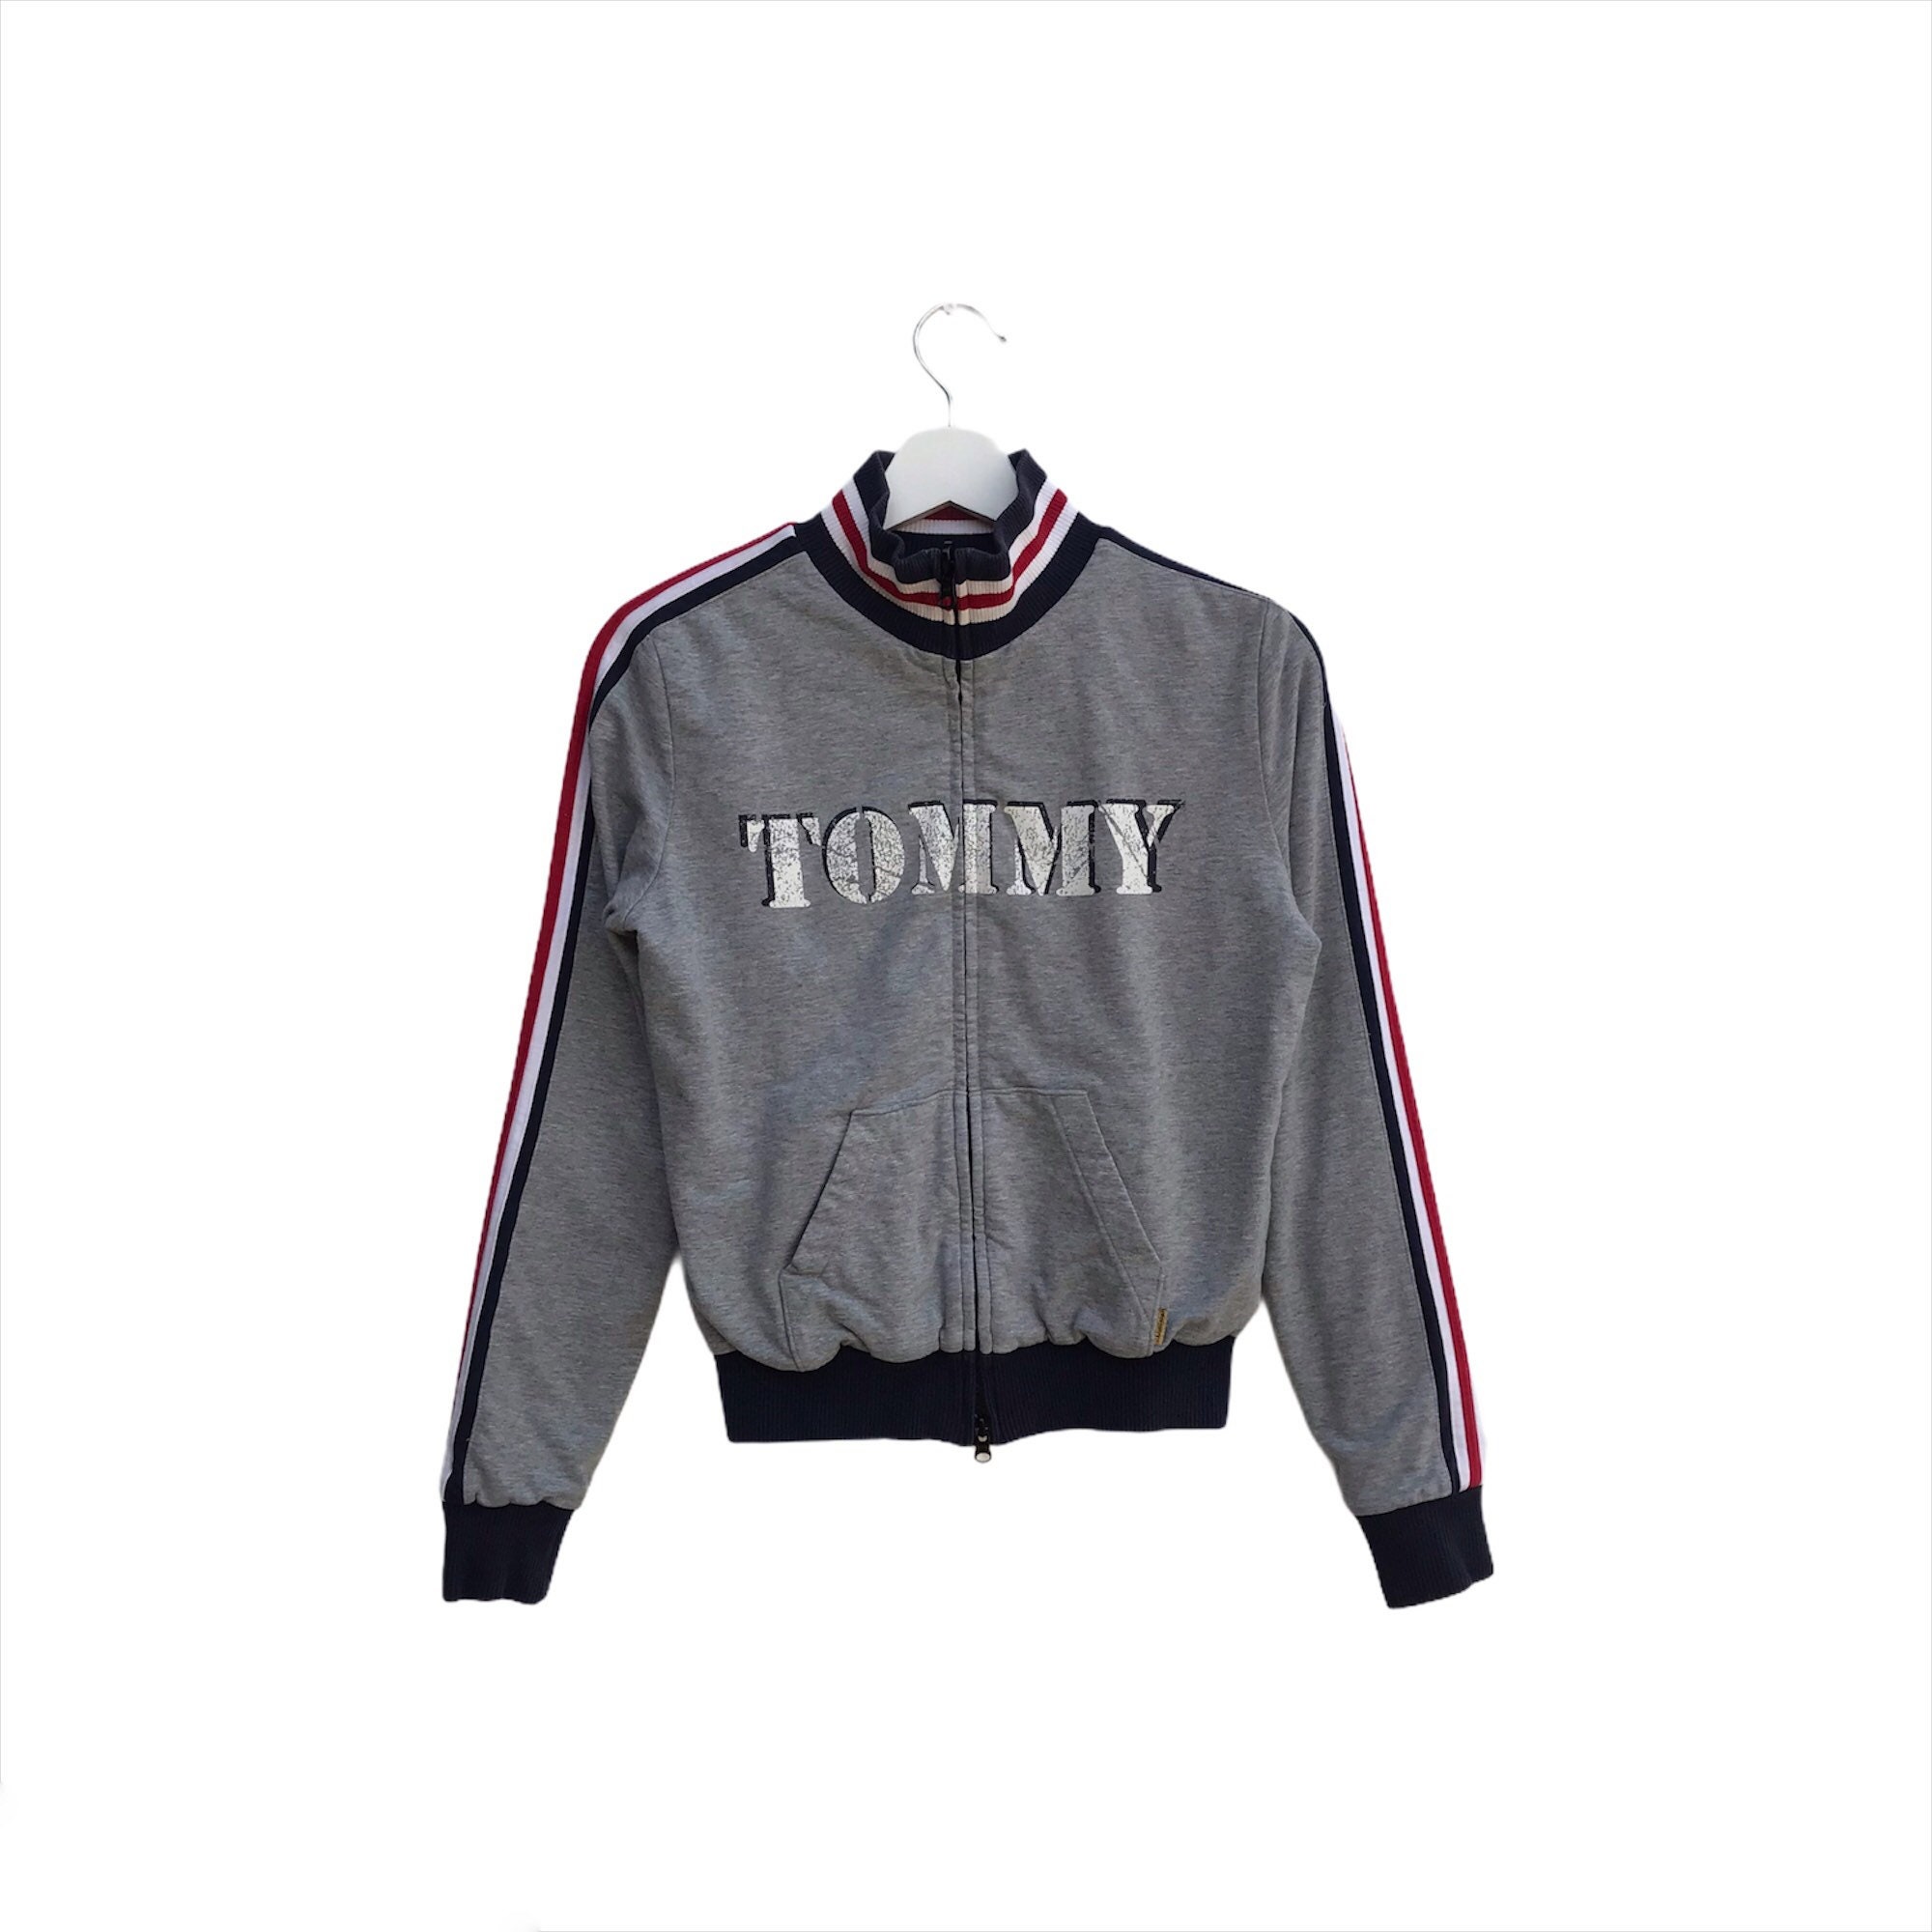 Tommy Girl zipped up reversible sweatshirt embroidery spell out logo pullover  fashion style  streetwear  top fashions  small size